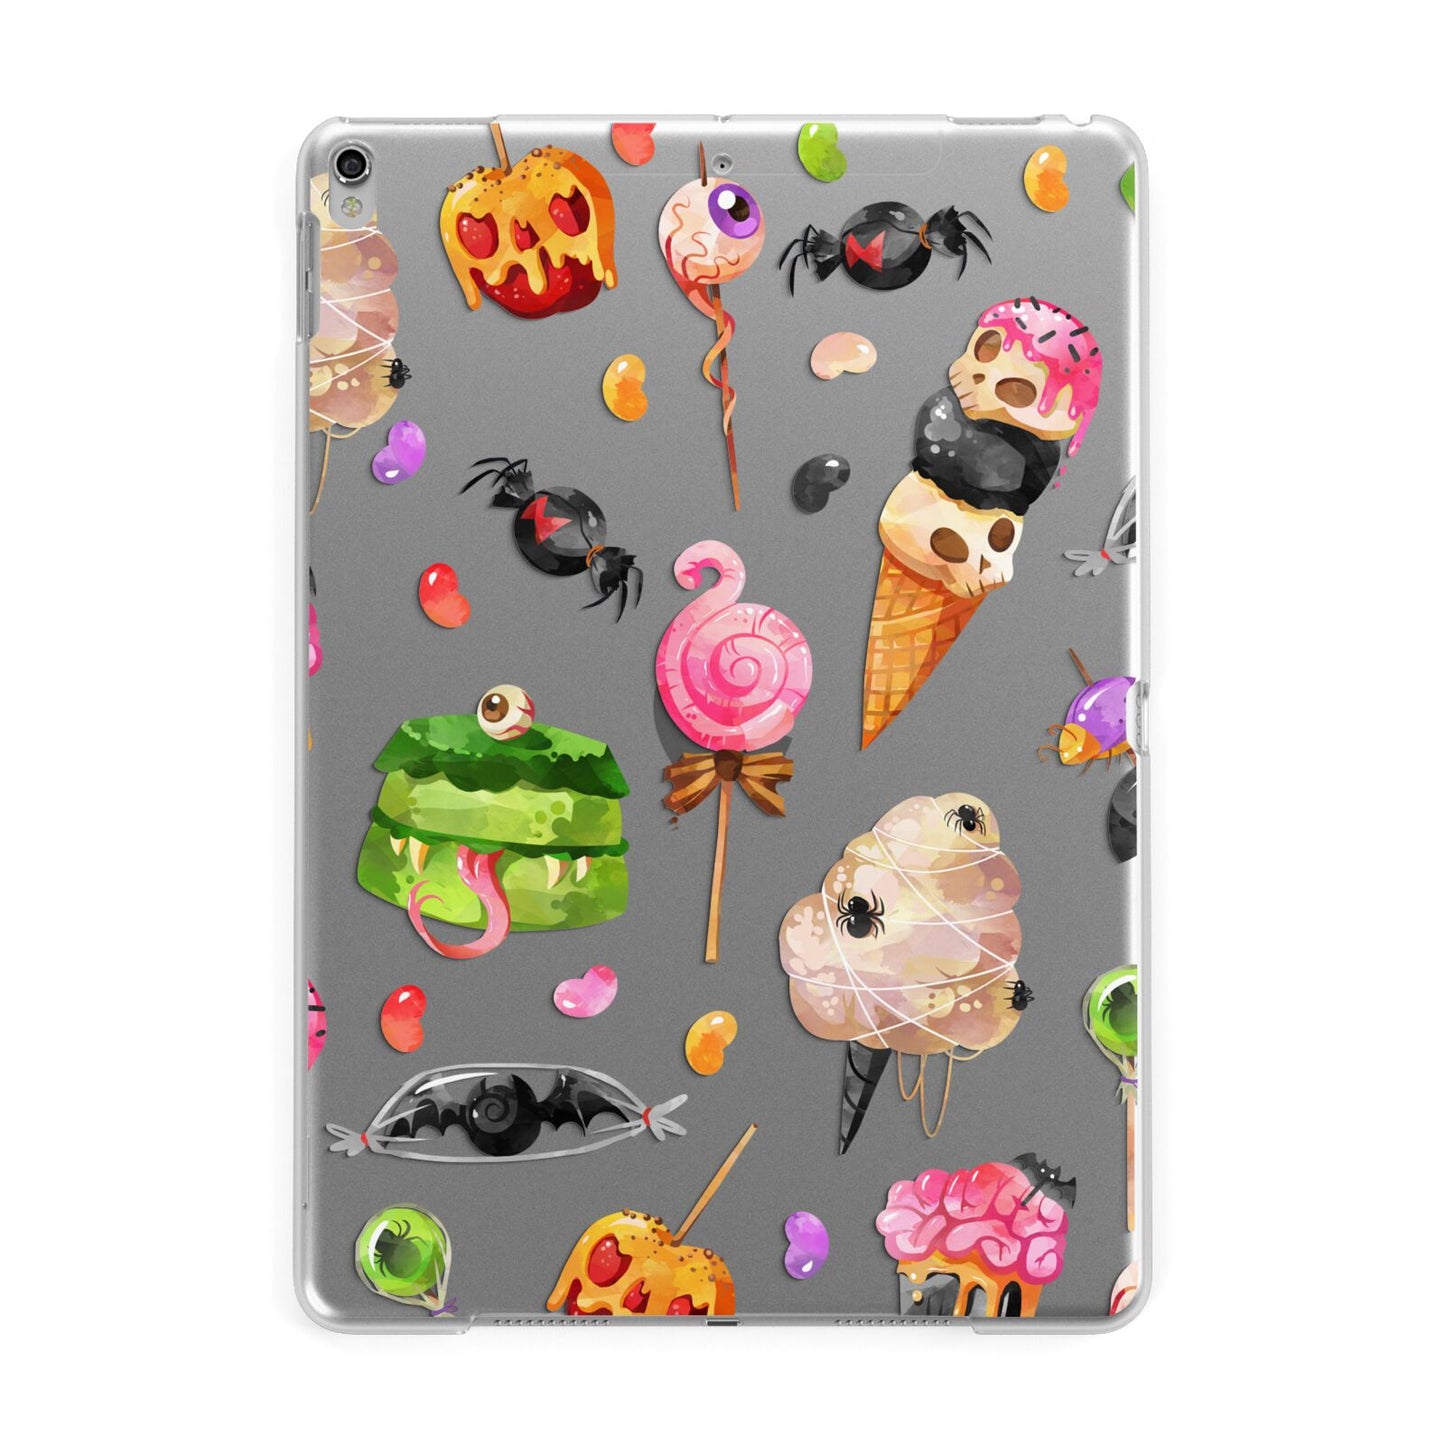 Halloween Cakes and Candy Apple iPad Silver Case